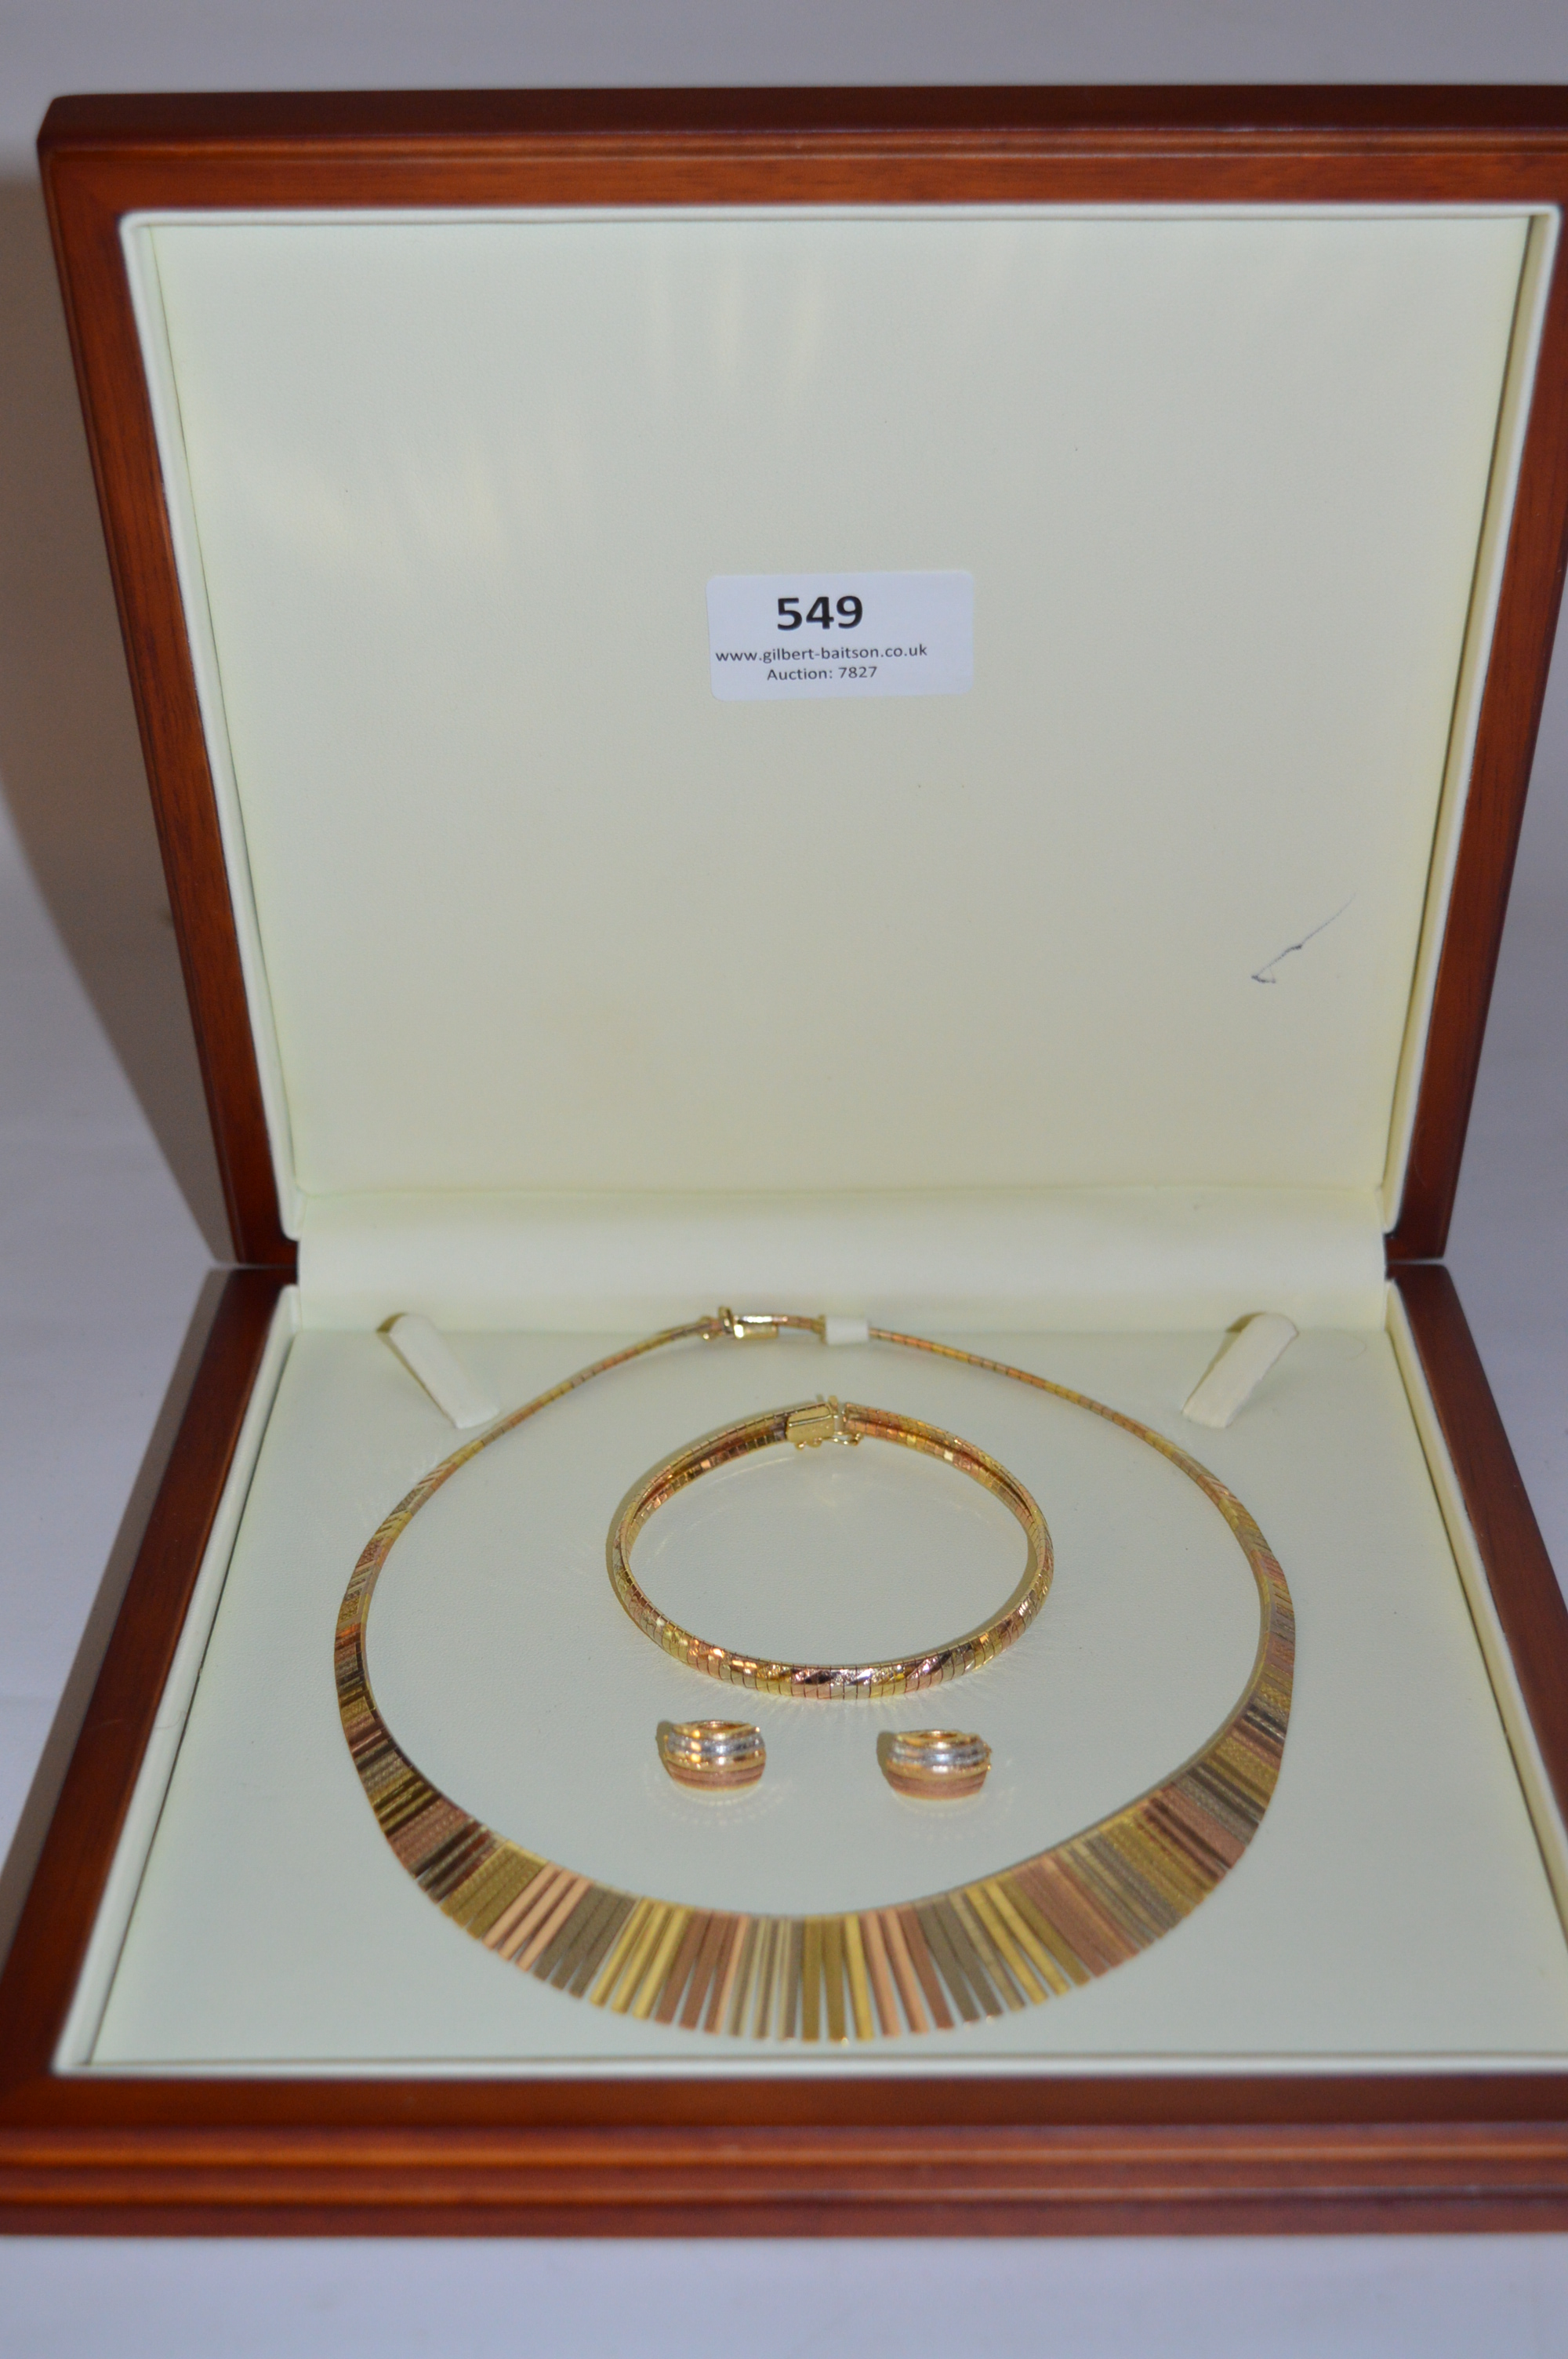 Cased 18cT Three Tone Gold Necklace, Bangle and Earrings Set - 53g